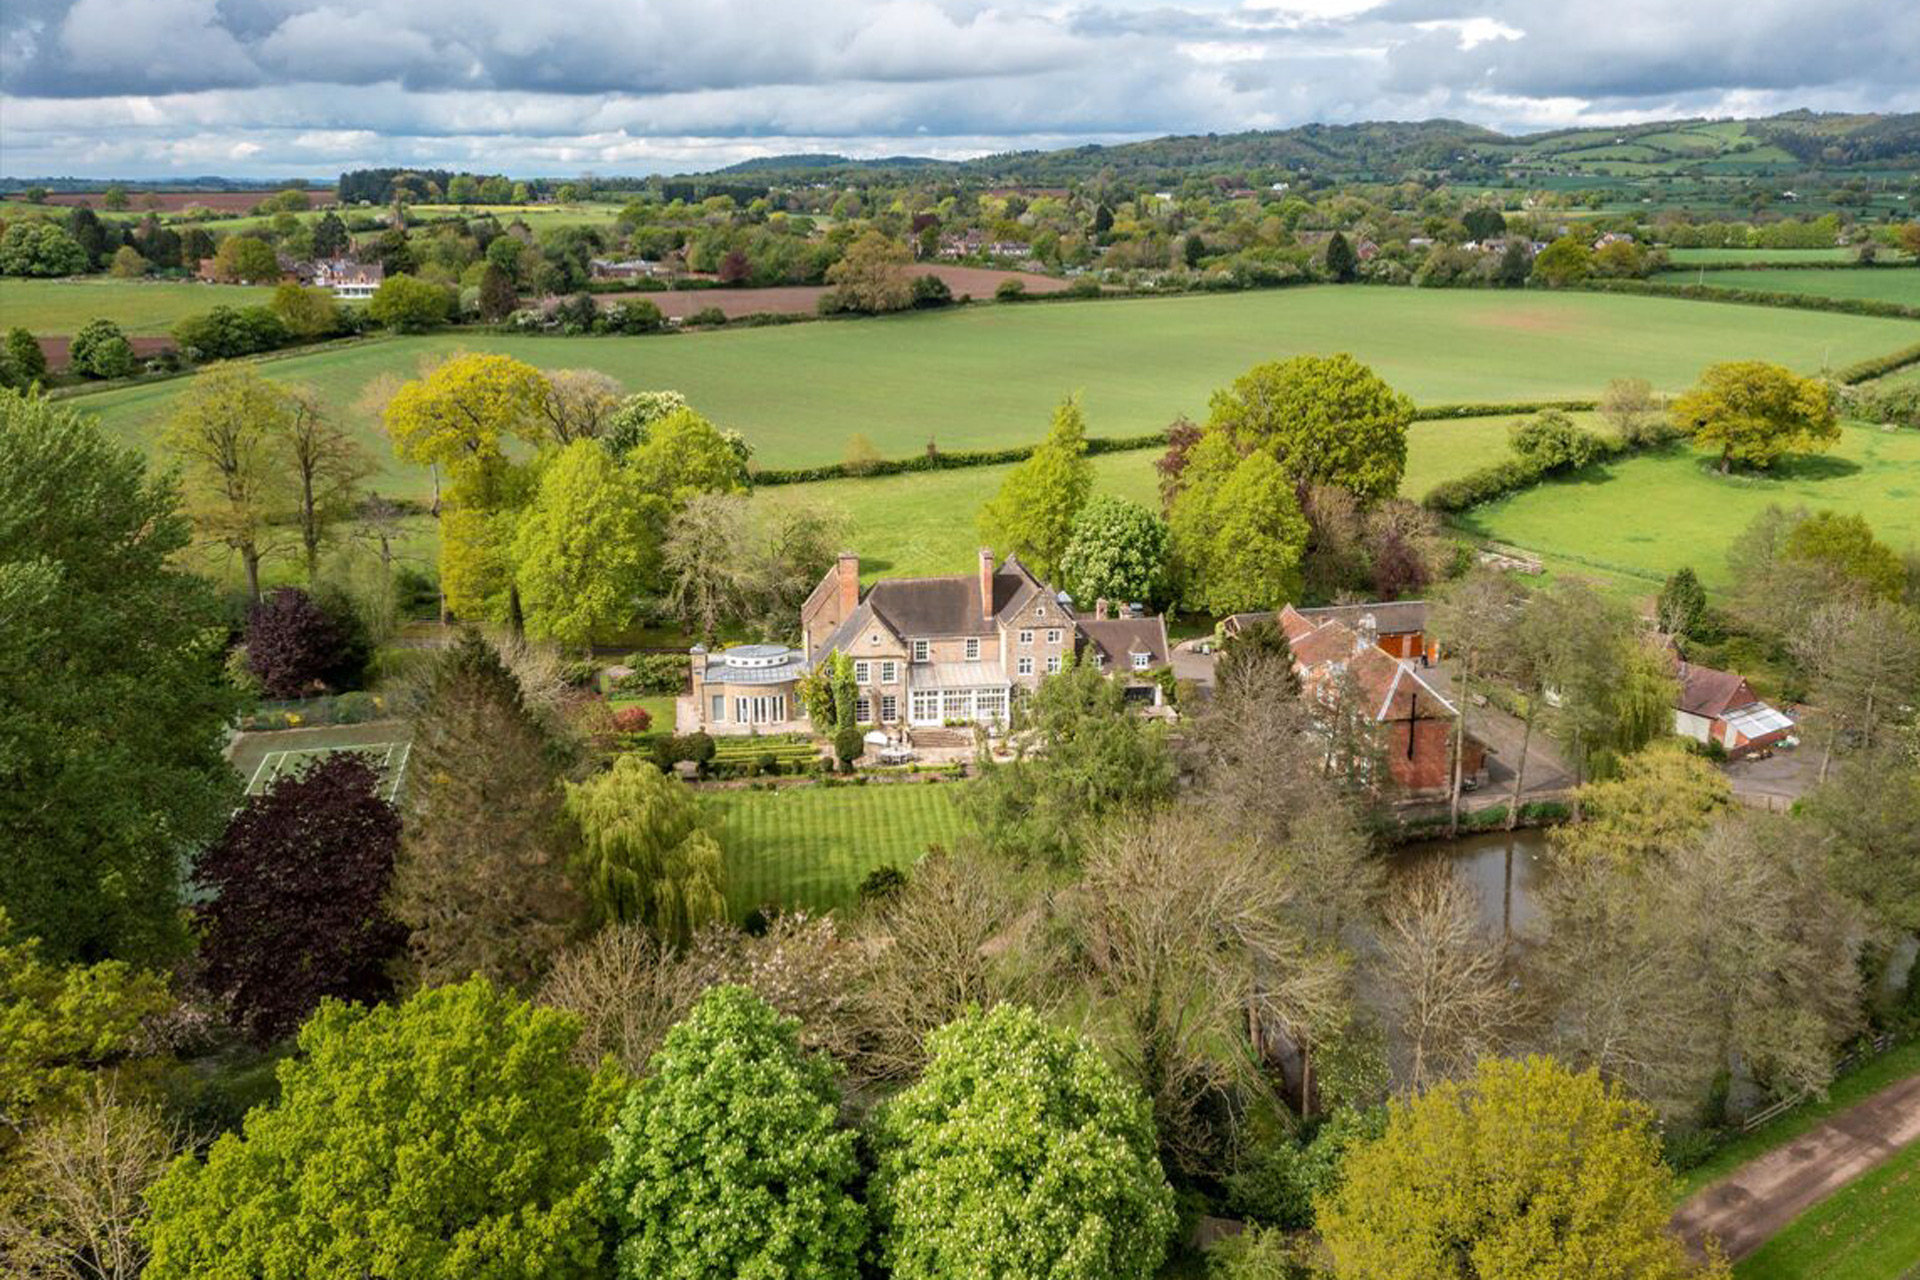 Aerial view of large country estate with tennis court, outbuildings and paddocks.